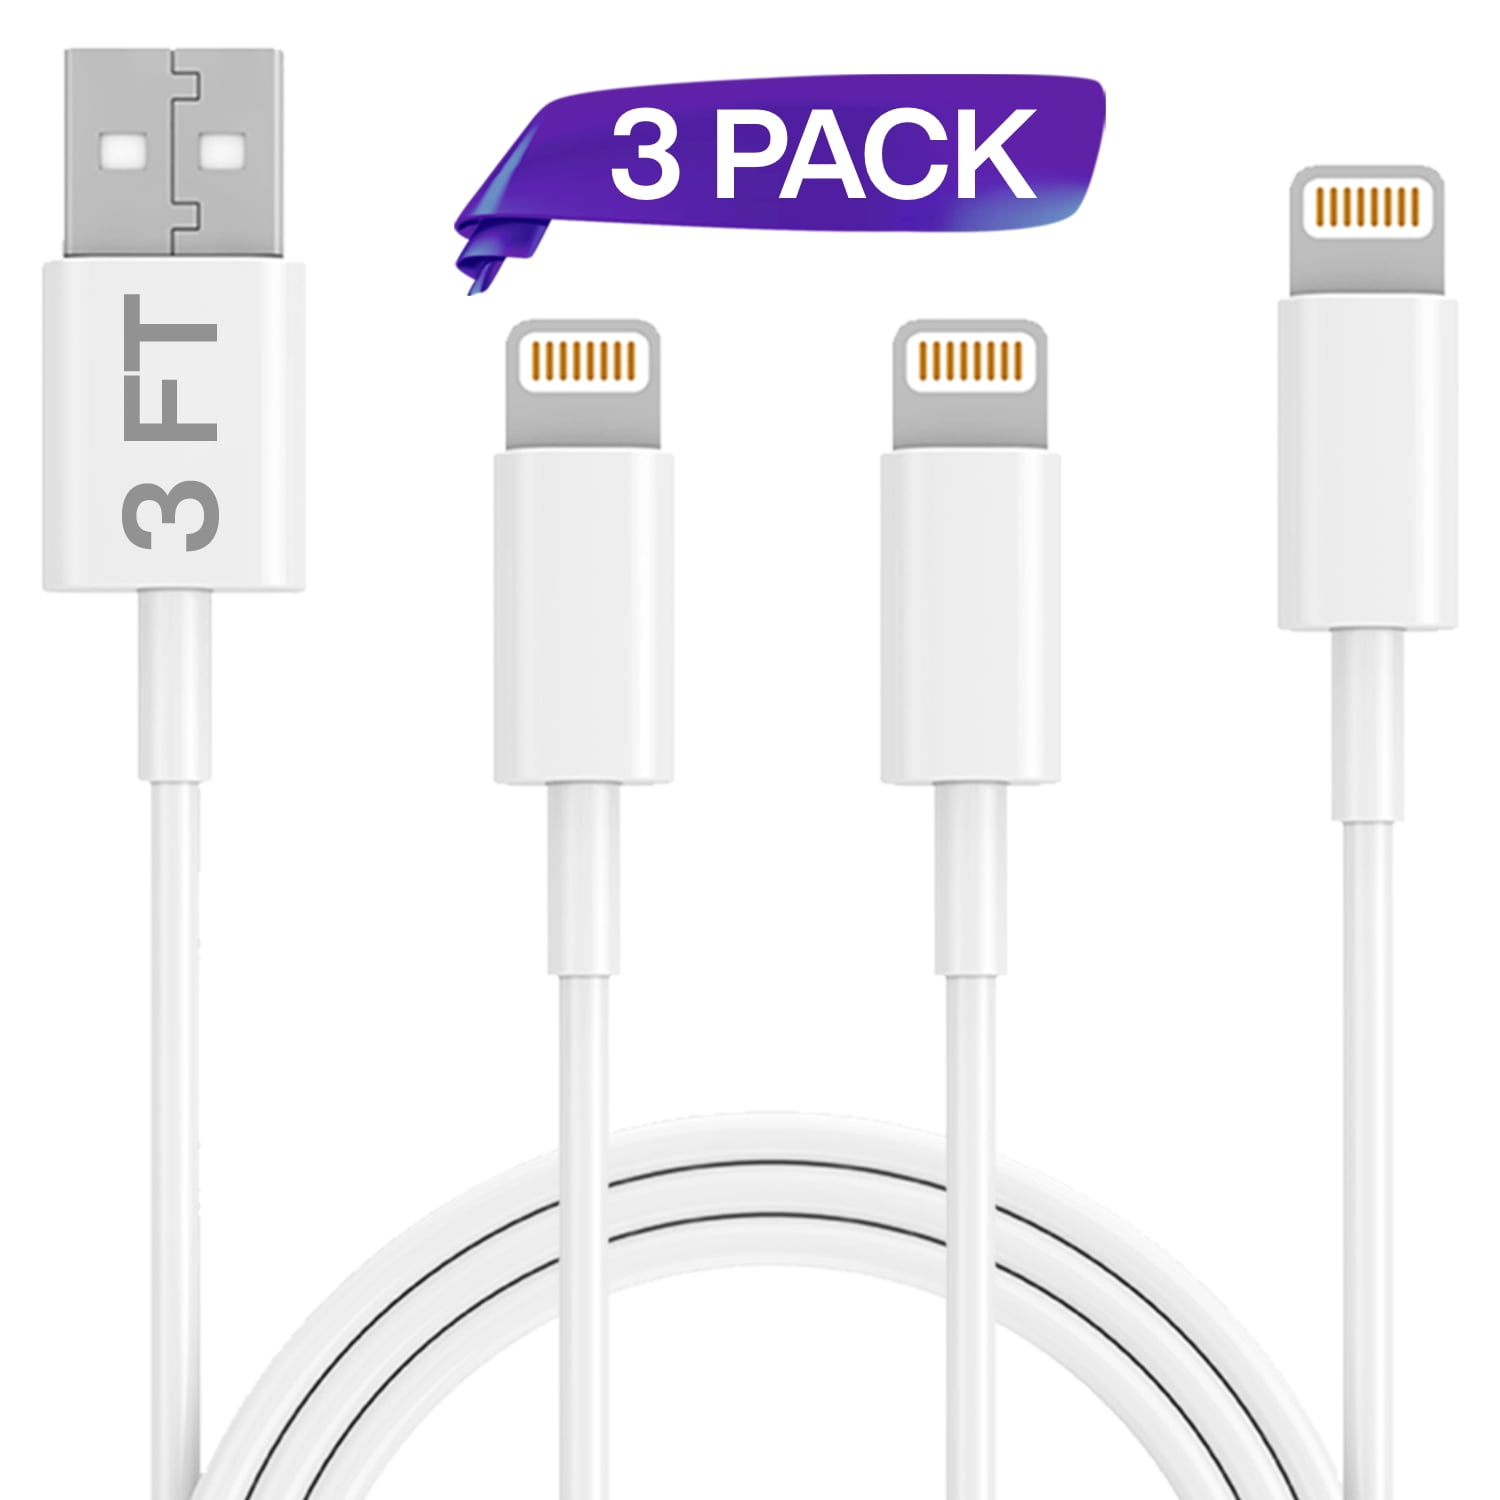 Apple MFi Certified for New Airpods iPhone Chargers iPad Pro Air 2 and More Anker 3.3ft/ 1m Premium Nylon Lightning Cable iPhone XS/XS Max/XR/iPhone X/ 8/8 Plus/ 7/7 Plus/ 6/6 Plus 